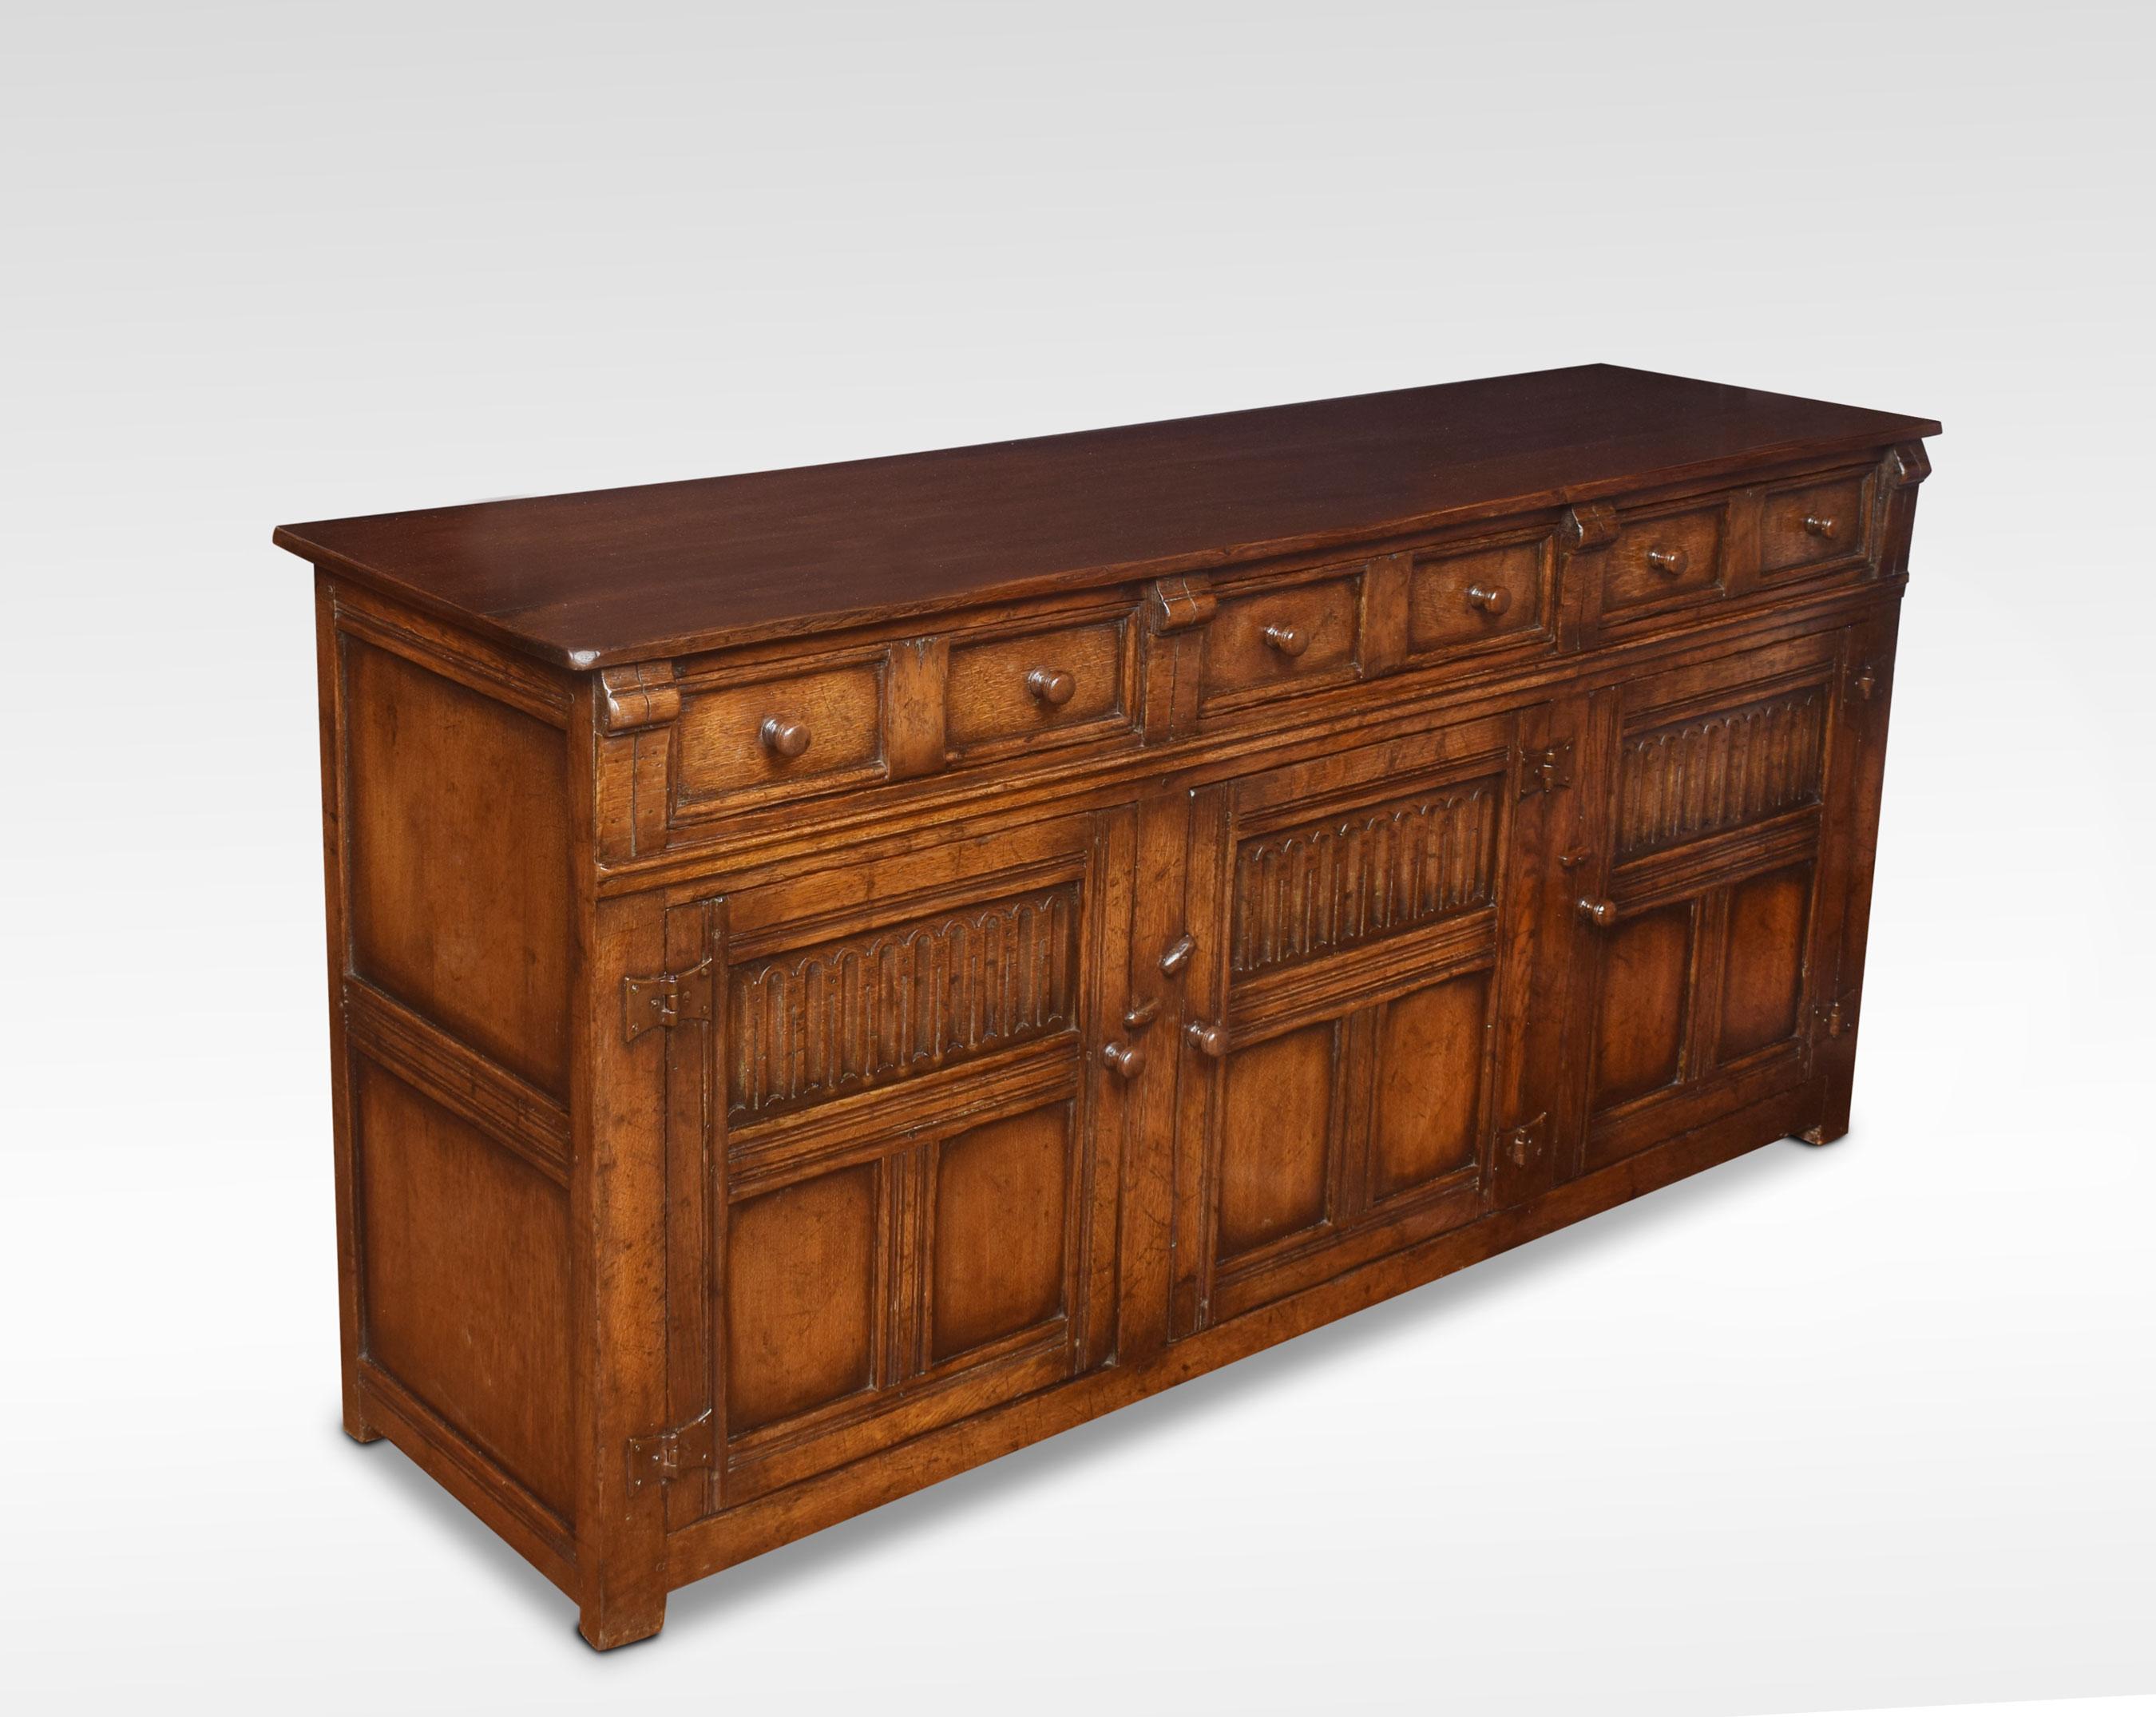 Jacobean style oak dresser base, the large rectangular top to the frieze fitted with three drawers above three paneled and fluted doors opening to reveal a large storage area. All raised up on stylized feet.
Dimensions:
Height 31.5 inches
Width